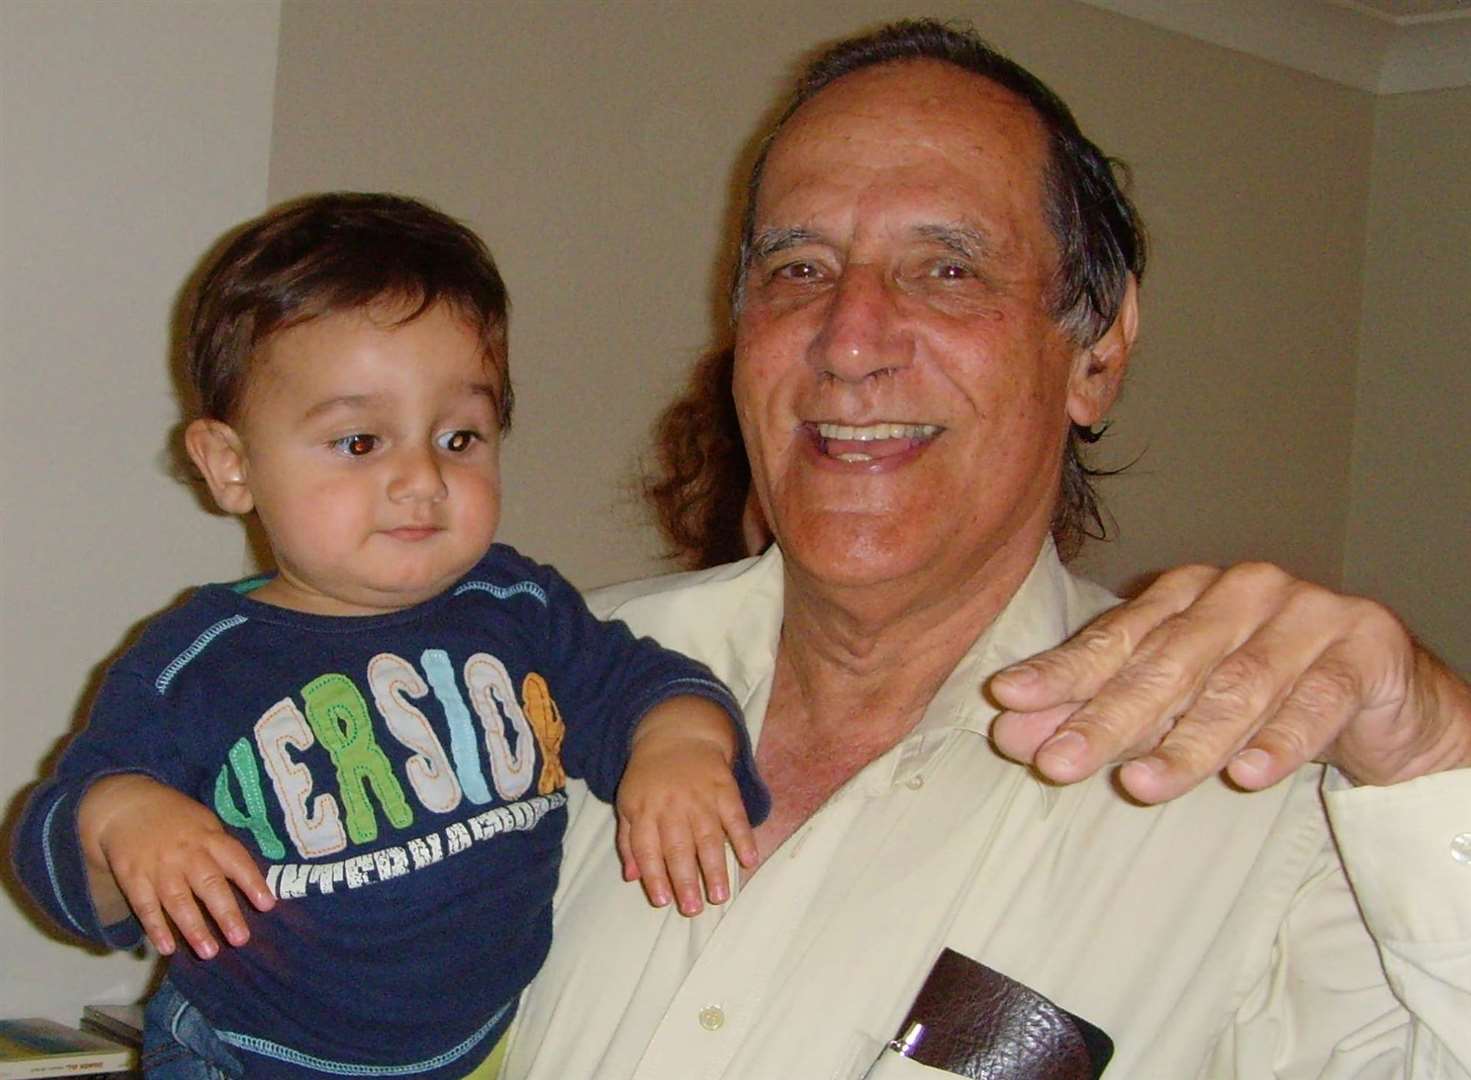 Yoram Hirshfeld ‘radiated so much kindness’, according to former student Amnon Eden, whose son Saul is pictured here with Mr Hirshfield in 2007. Picture: Amnon Eden